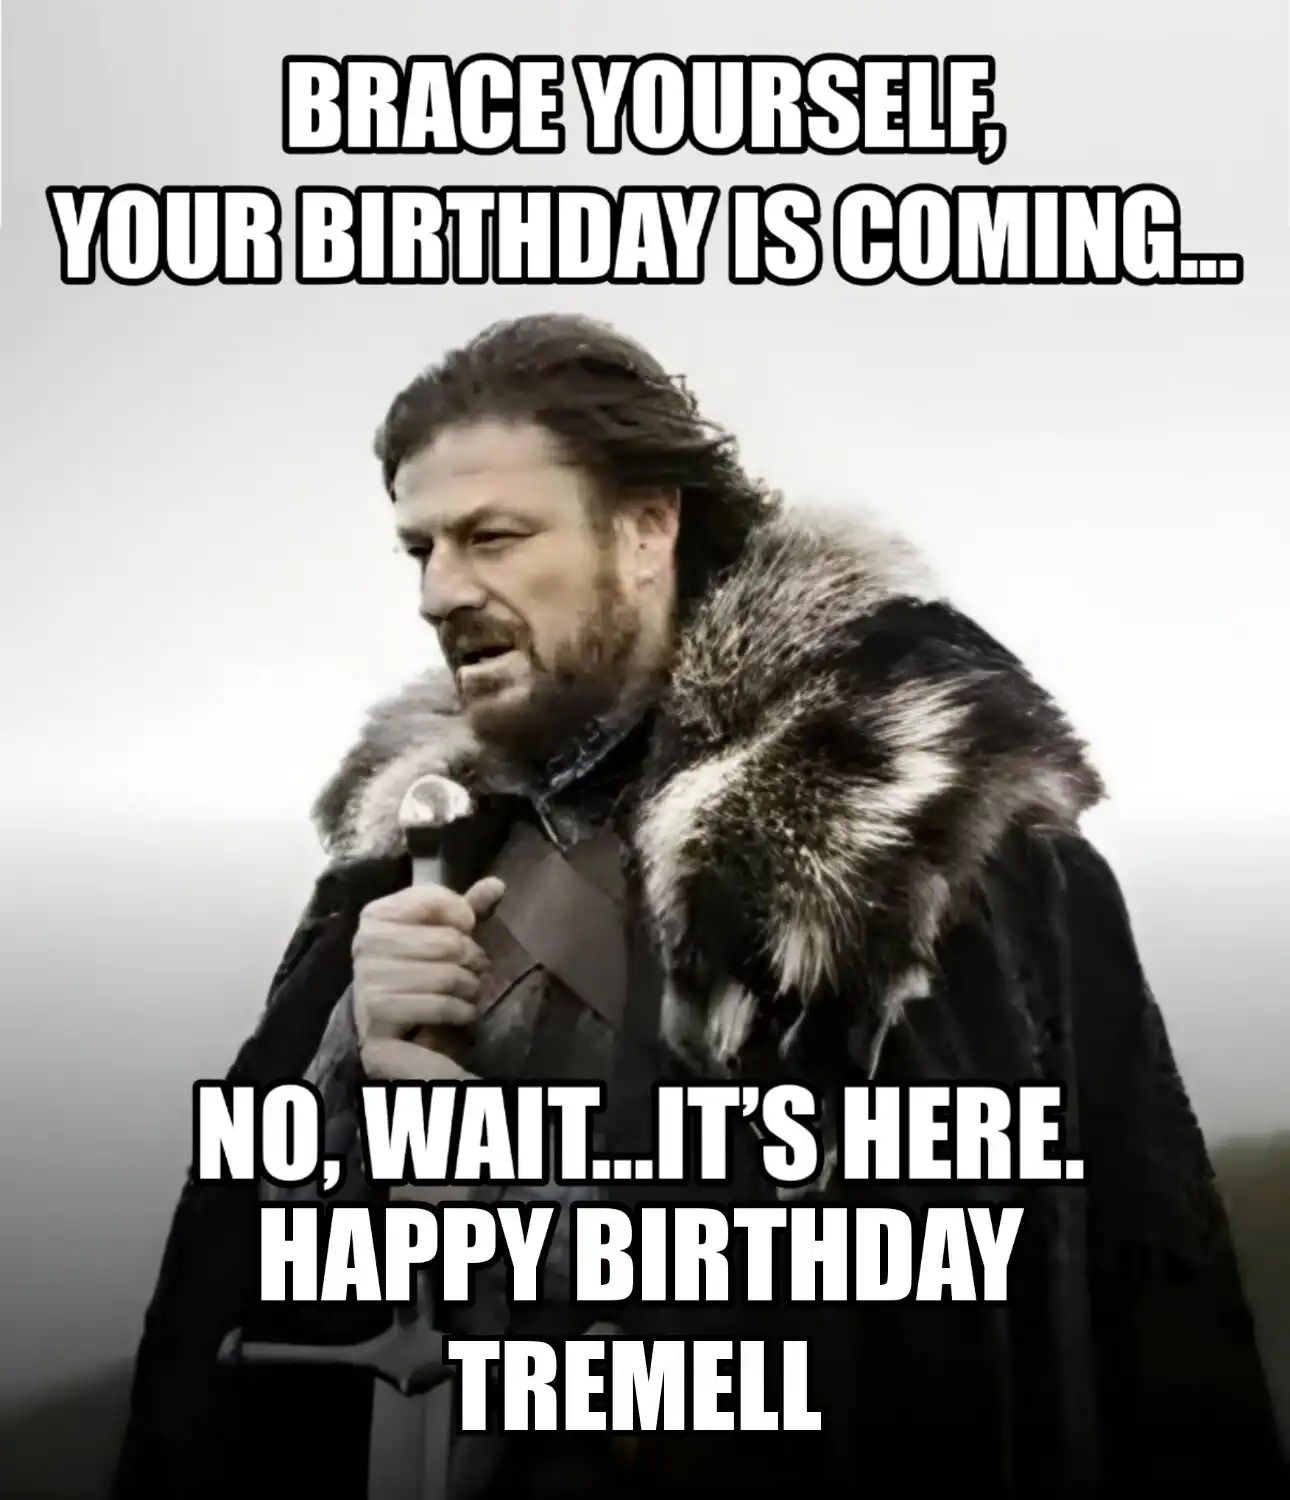 Happy Birthday Tremell Brace Yourself Your Birthday Is Coming Meme